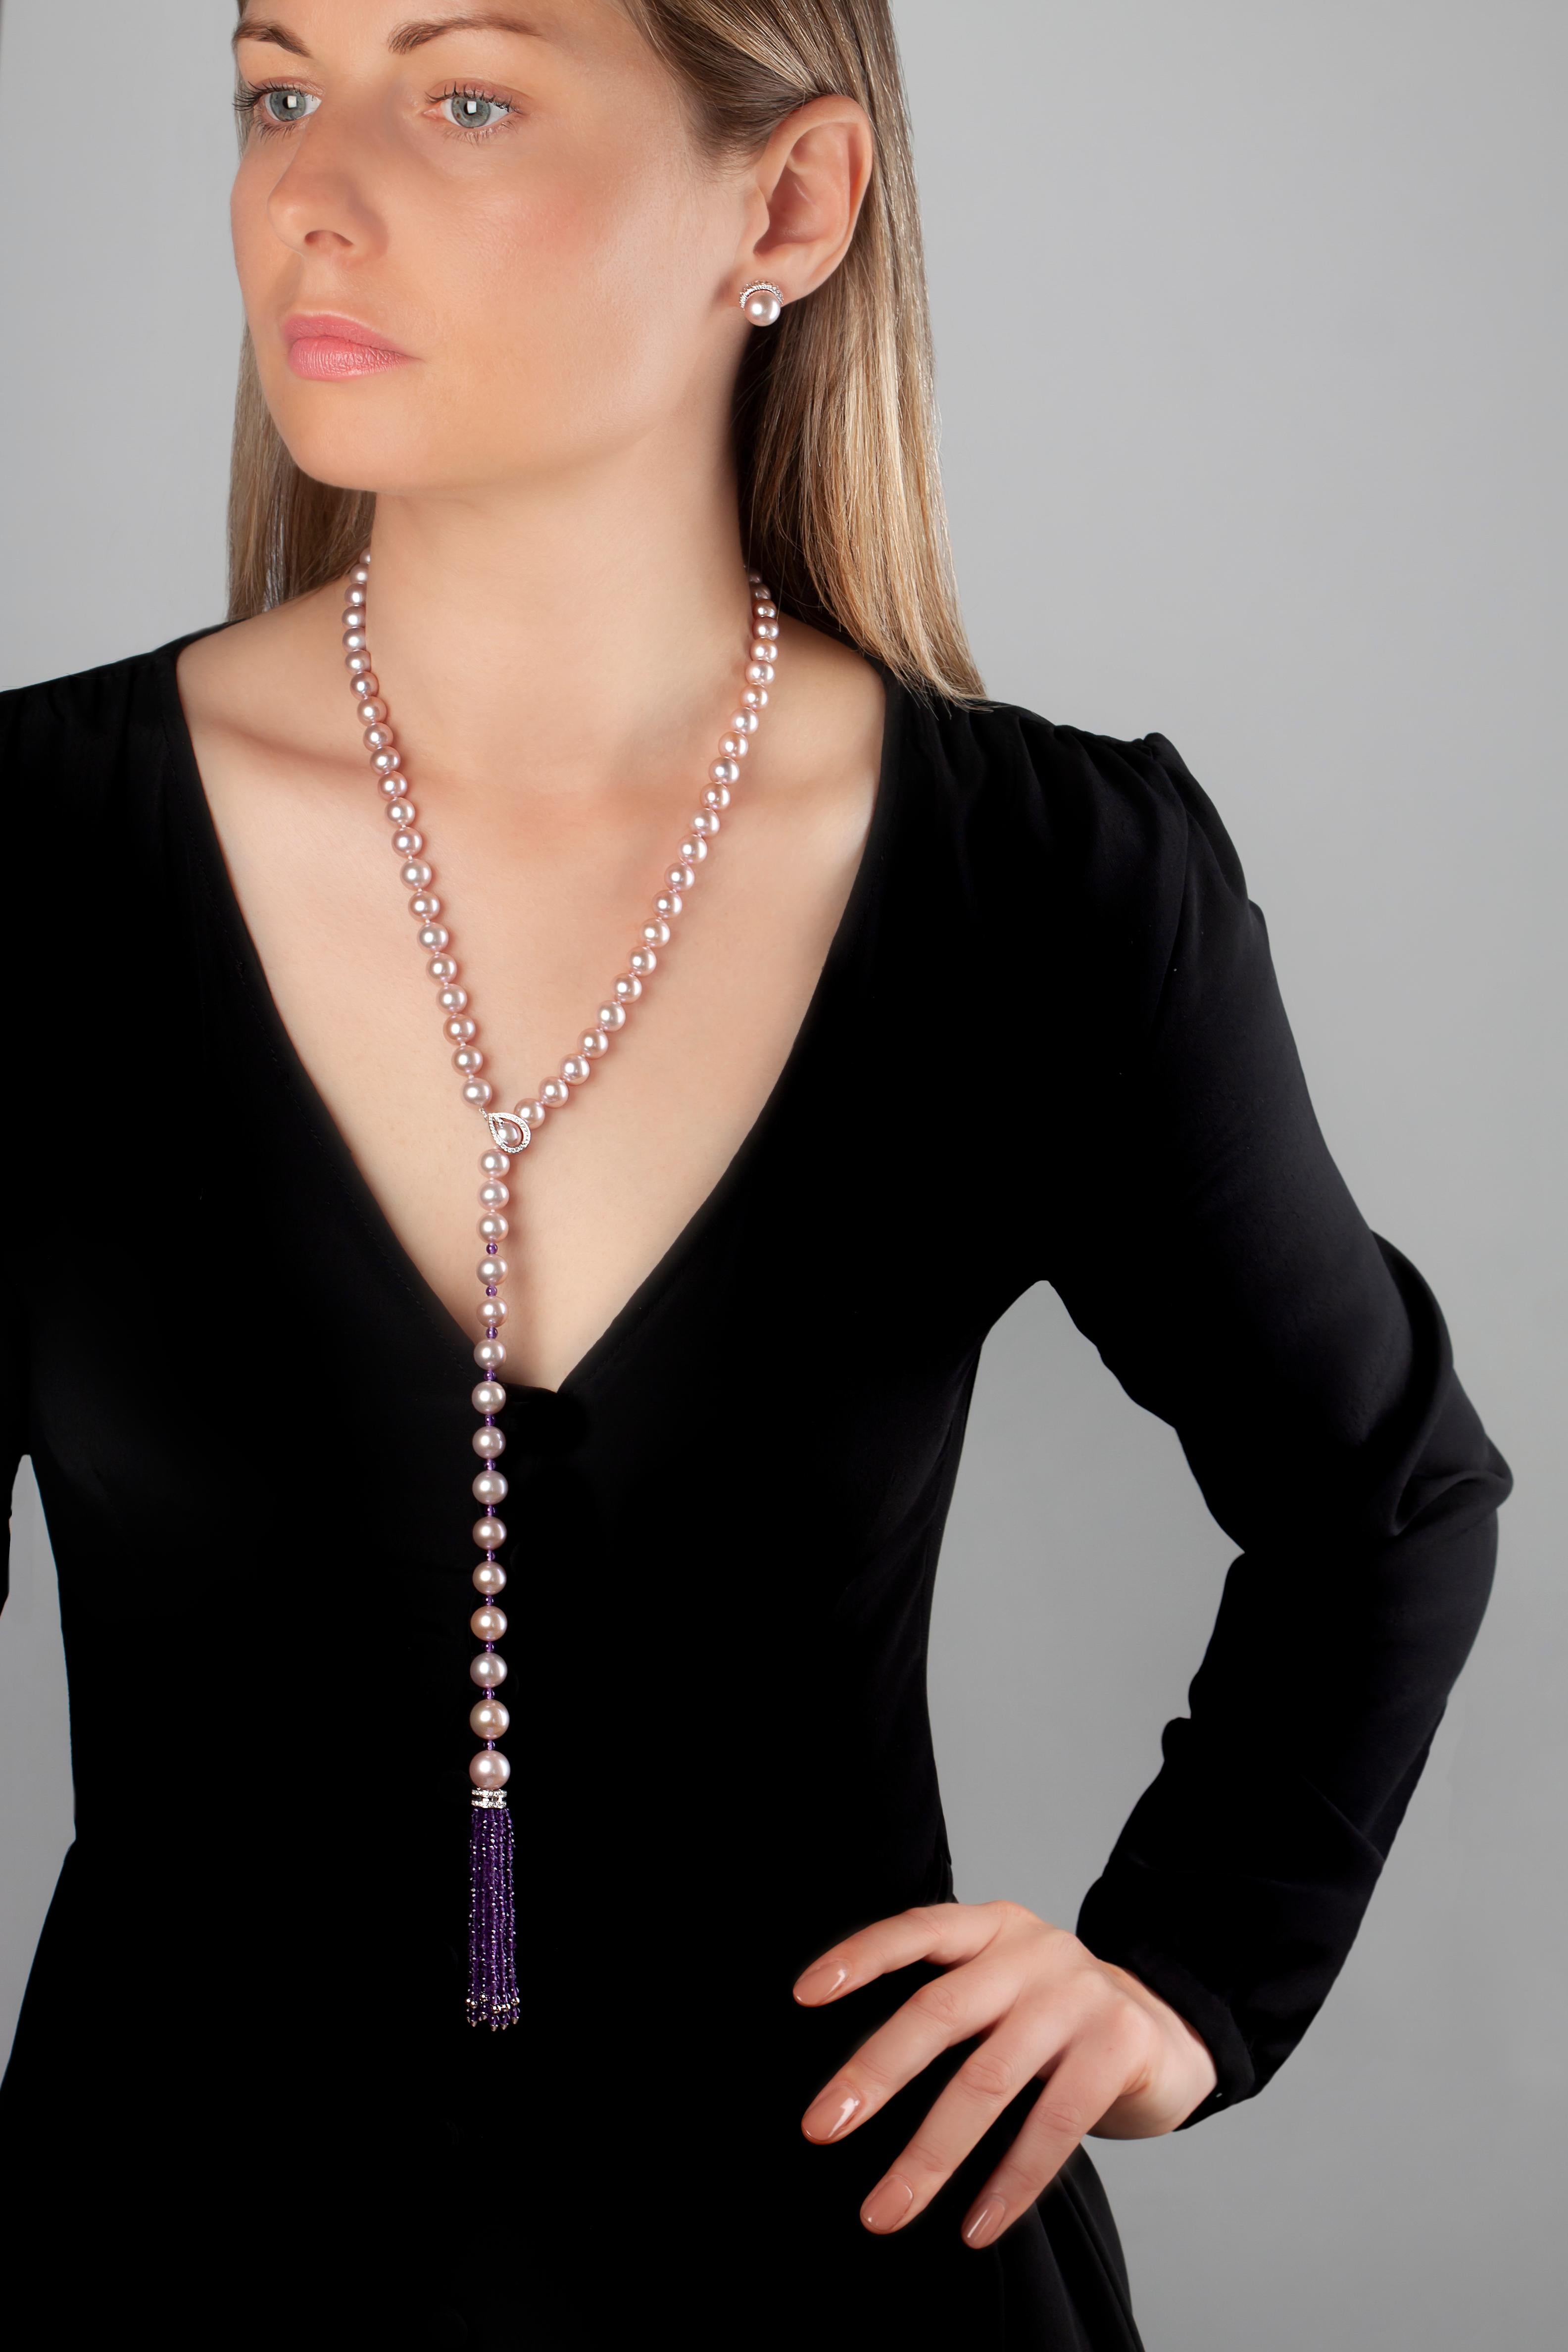 This unique lariat-style necklace by Yoko London features a row pastel pink Freshwater pearls culminating in an alluring amethyst tassel. The diamond clasp can be fastened at different points allowing the necklace to be manipulated to suit multiple